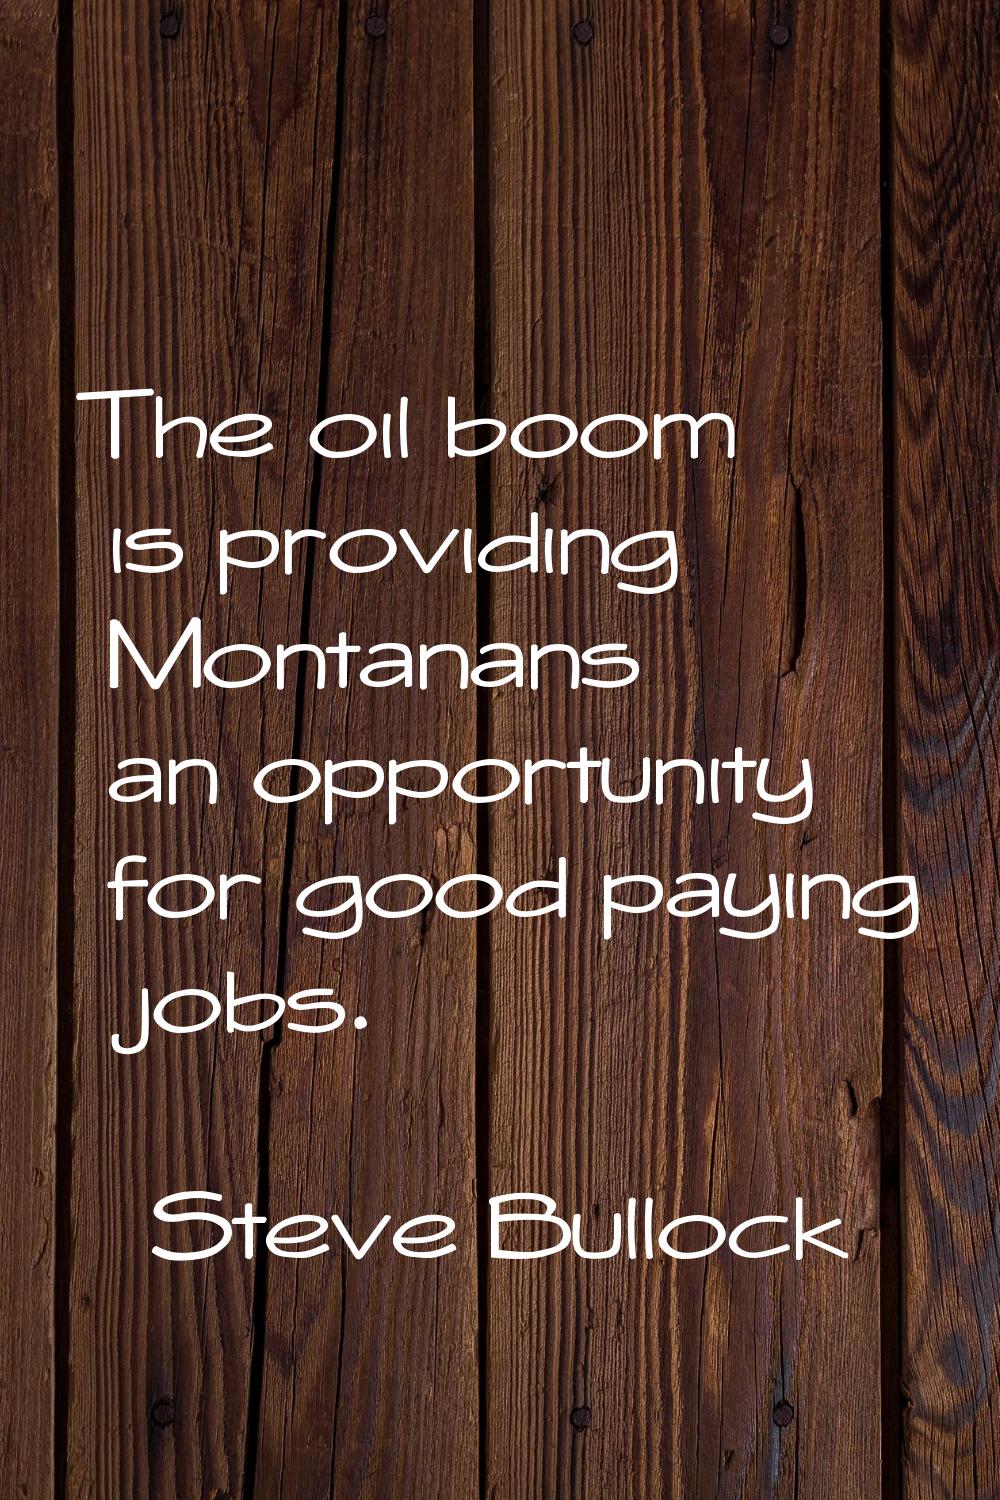 The oil boom is providing Montanans an opportunity for good paying jobs.